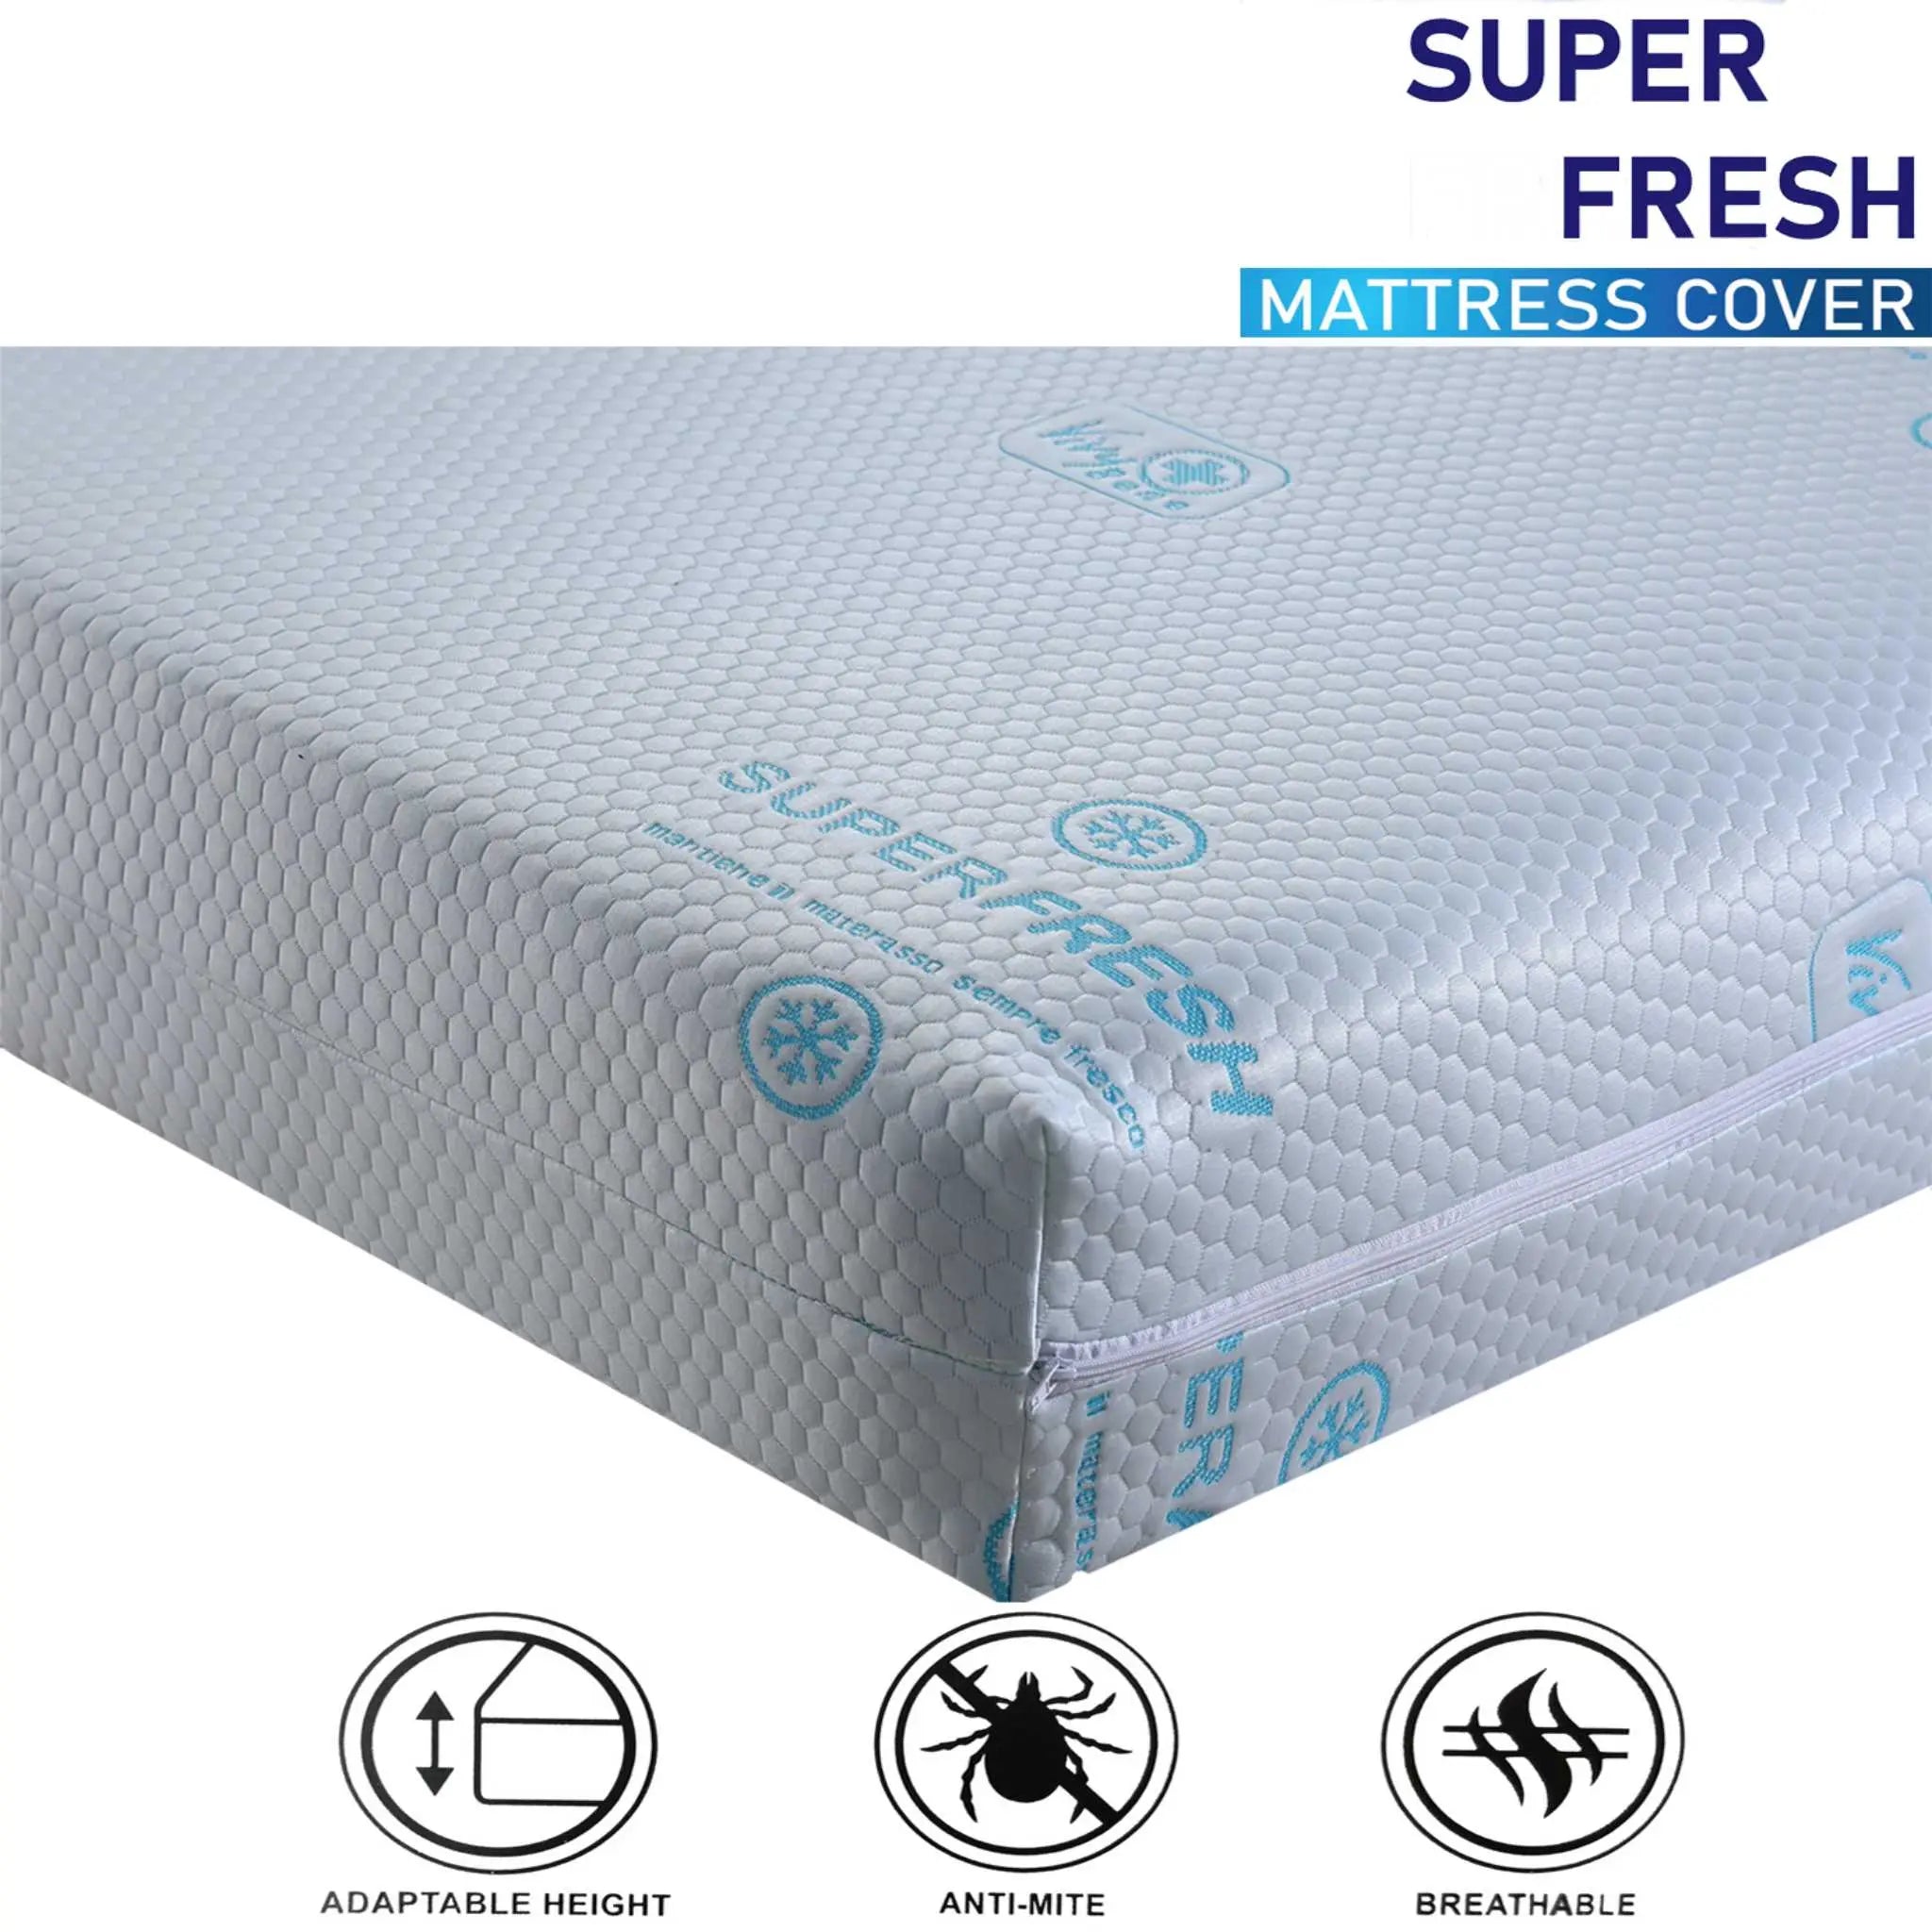 Queen Size Waterproof Mattress Protector, Viscose Made from Bamboo Cooling Mattress Cover Breathable Soft 3D Air Fabric Noiseless Mattress Pad Cover 8"-21" Deep Pocket - Beach Stone